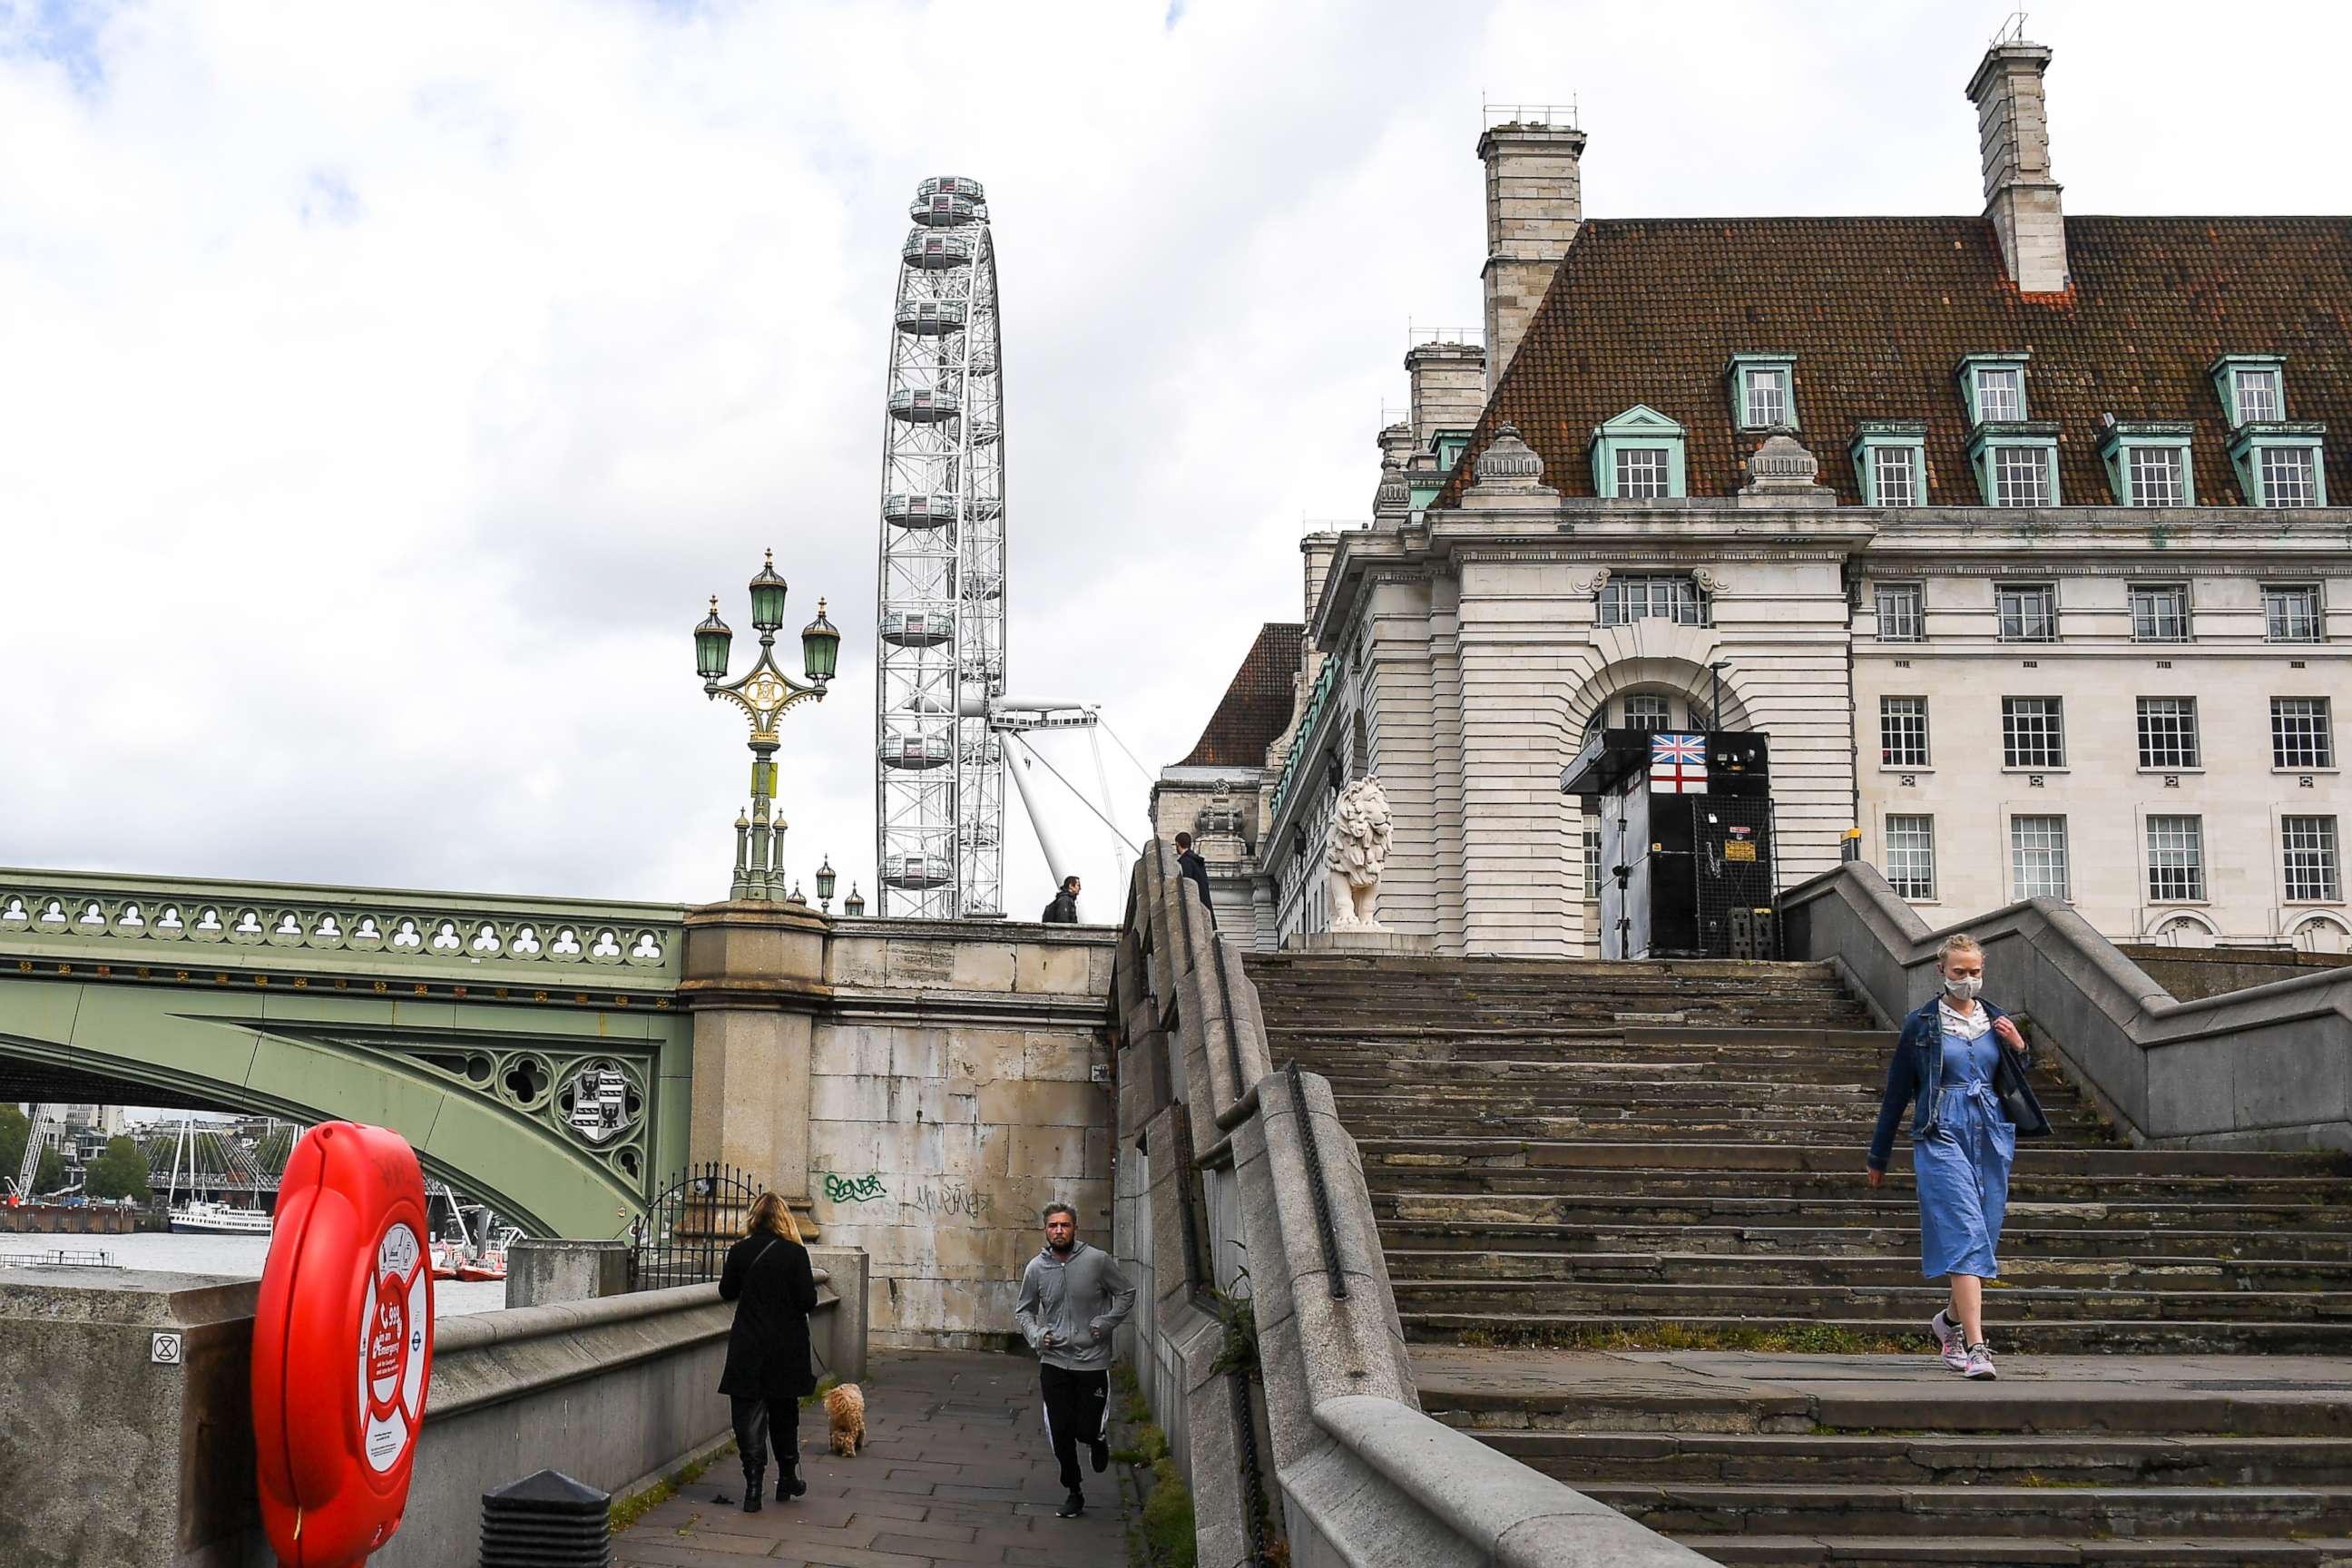 PHOTO: A woman wearing a face mask walks down the stairs at the end of Westminster Bridge in London on May 1, 2020, as the United Kingdom continues its lockdown to curb the spread of the novel coronavirus.